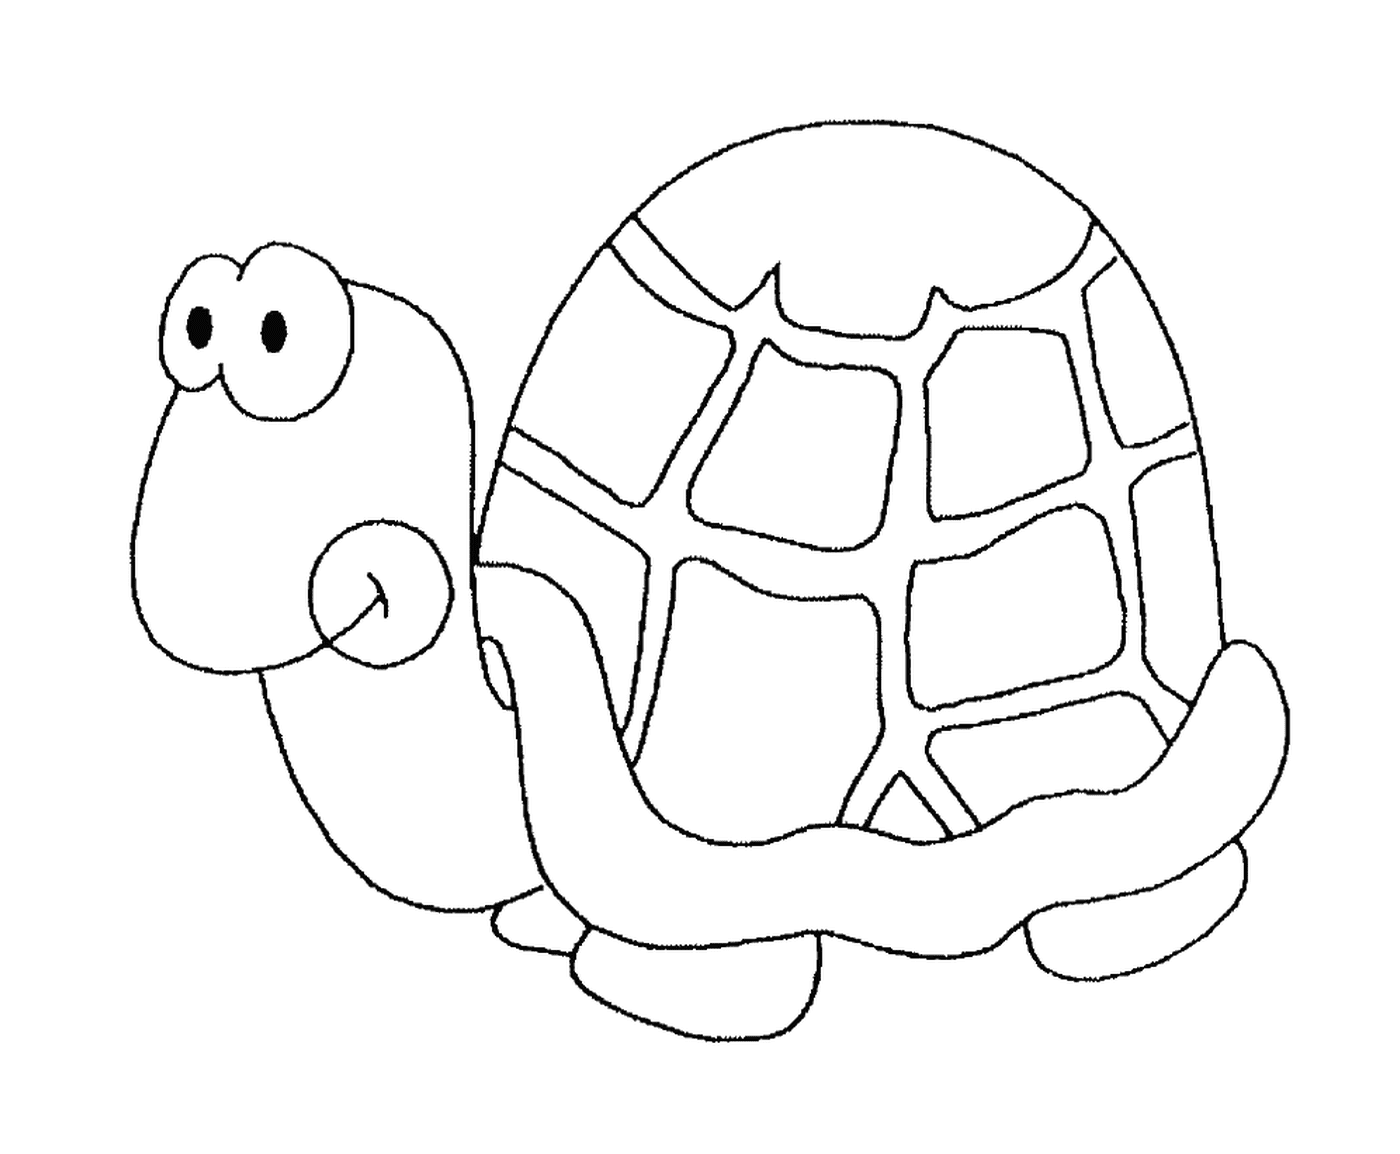  A turtle with a round shell 